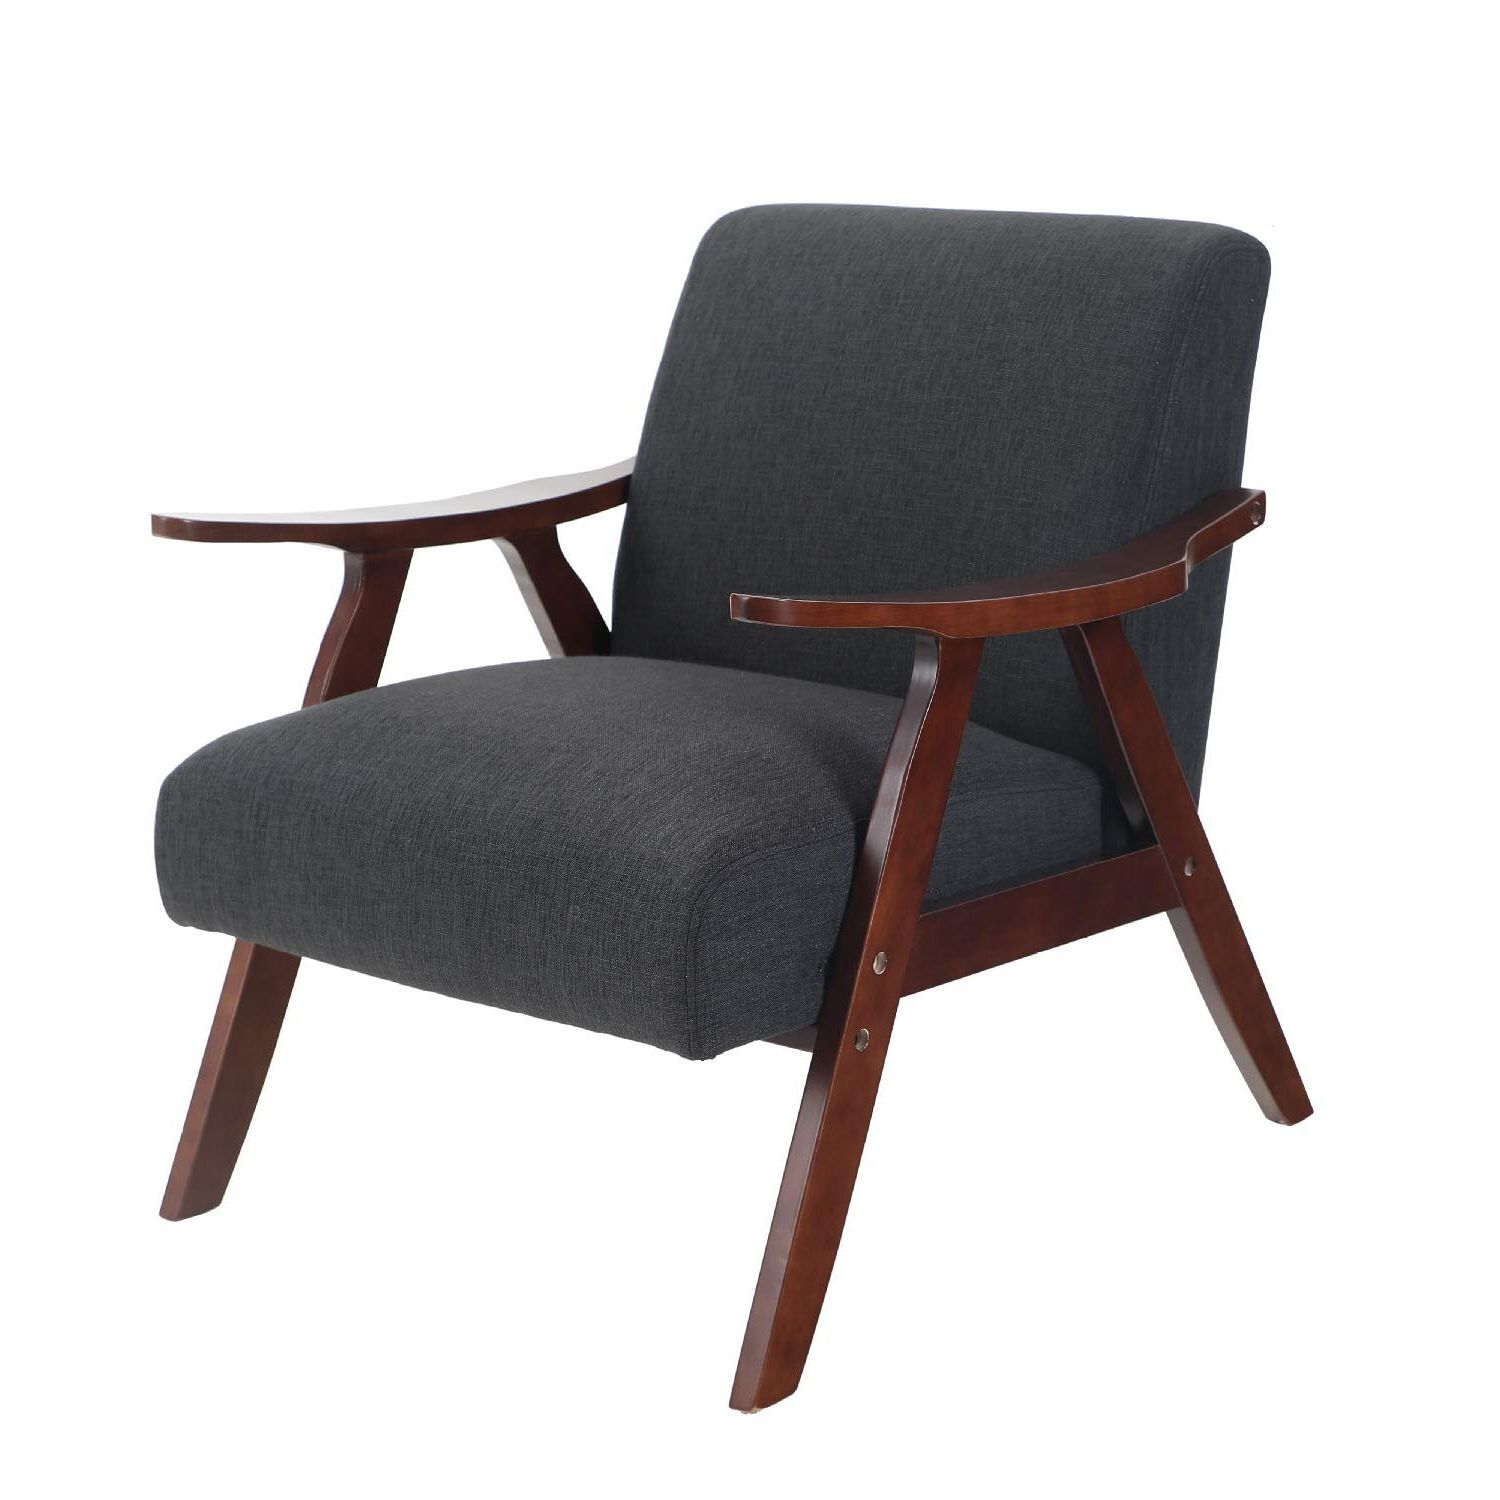 [%accent Chairs | Up To 60% Off Through 01/05 Intended For Most Current Bernardston Armchairs|bernardston Armchairs With Latest Accent Chairs | Up To 60% Off Through 01/05|most Popular Bernardston Armchairs Within Accent Chairs | Up To 60% Off Through 01/05|most Current Accent Chairs | Up To 60% Off Through 01/05 With Bernardston Armchairs%] (View 14 of 20)